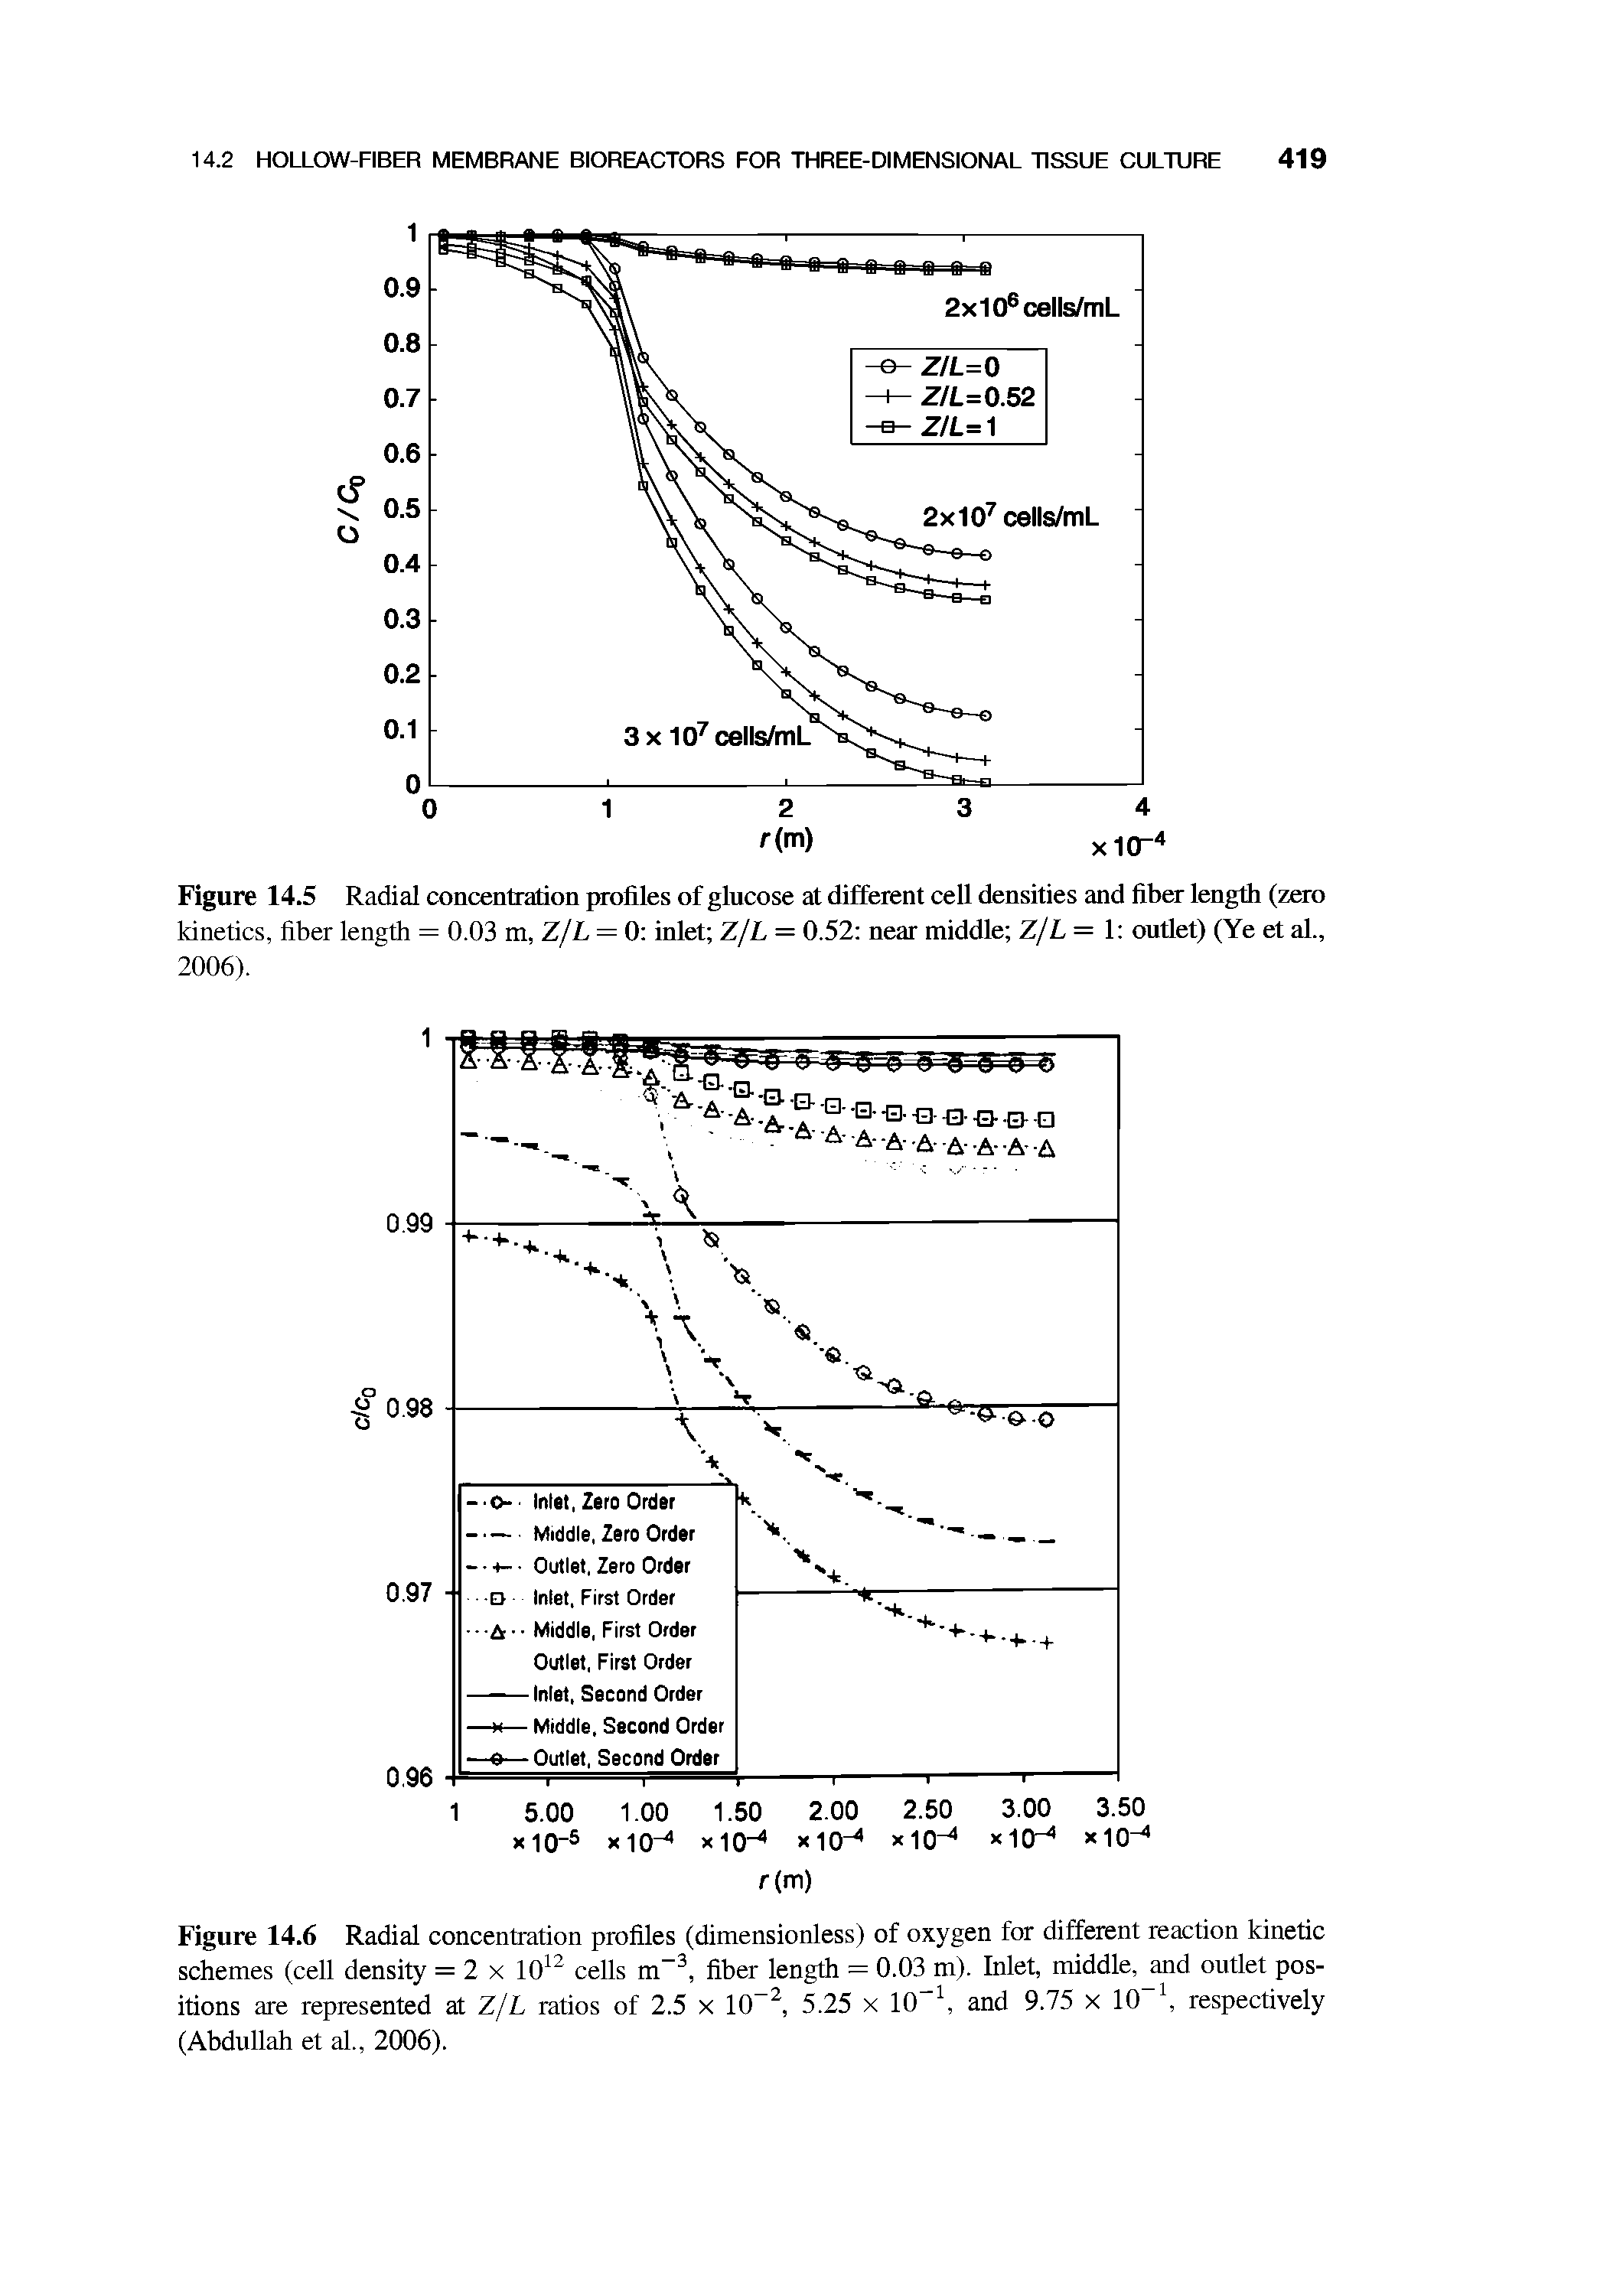 Figure 14.6 Radial concentration profiles (dimensionless) of oxygen for different reaction kinetic schemes (cell density = 2 x 10 cells m fiber length = 0.03 m). Inlet, middle, and outlet positions are represented at Z/L ratios of 2.5 x 10 5.25 x 10 and 9.75 x 10 respectively (Abdullah et al., 2006).